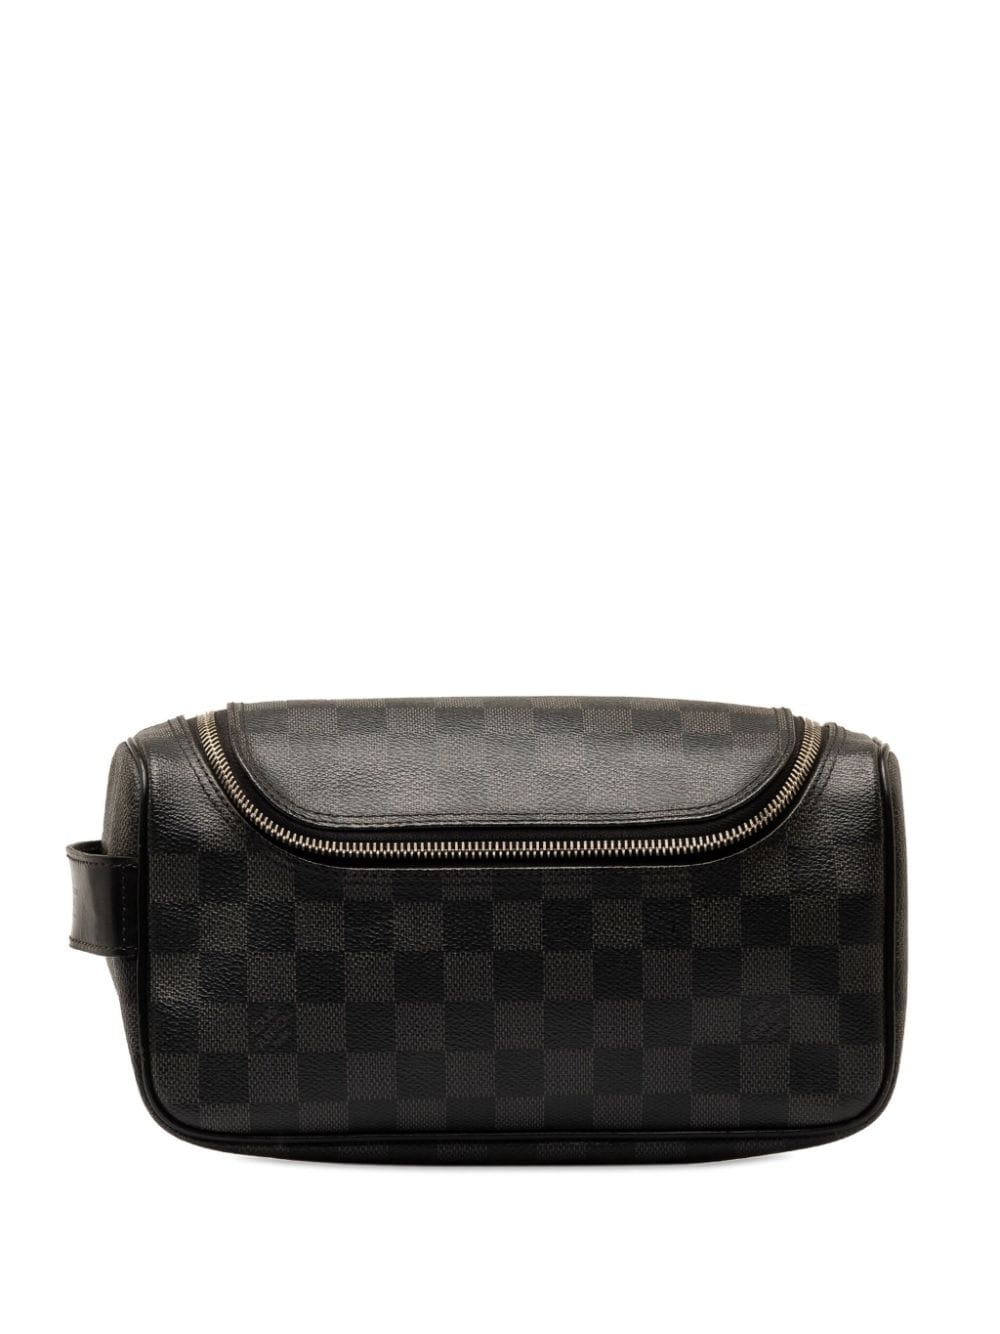 Louis Vuitton Pre-Owned 2013 Toiletry Clutch - Schwarz von Louis Vuitton Pre-Owned